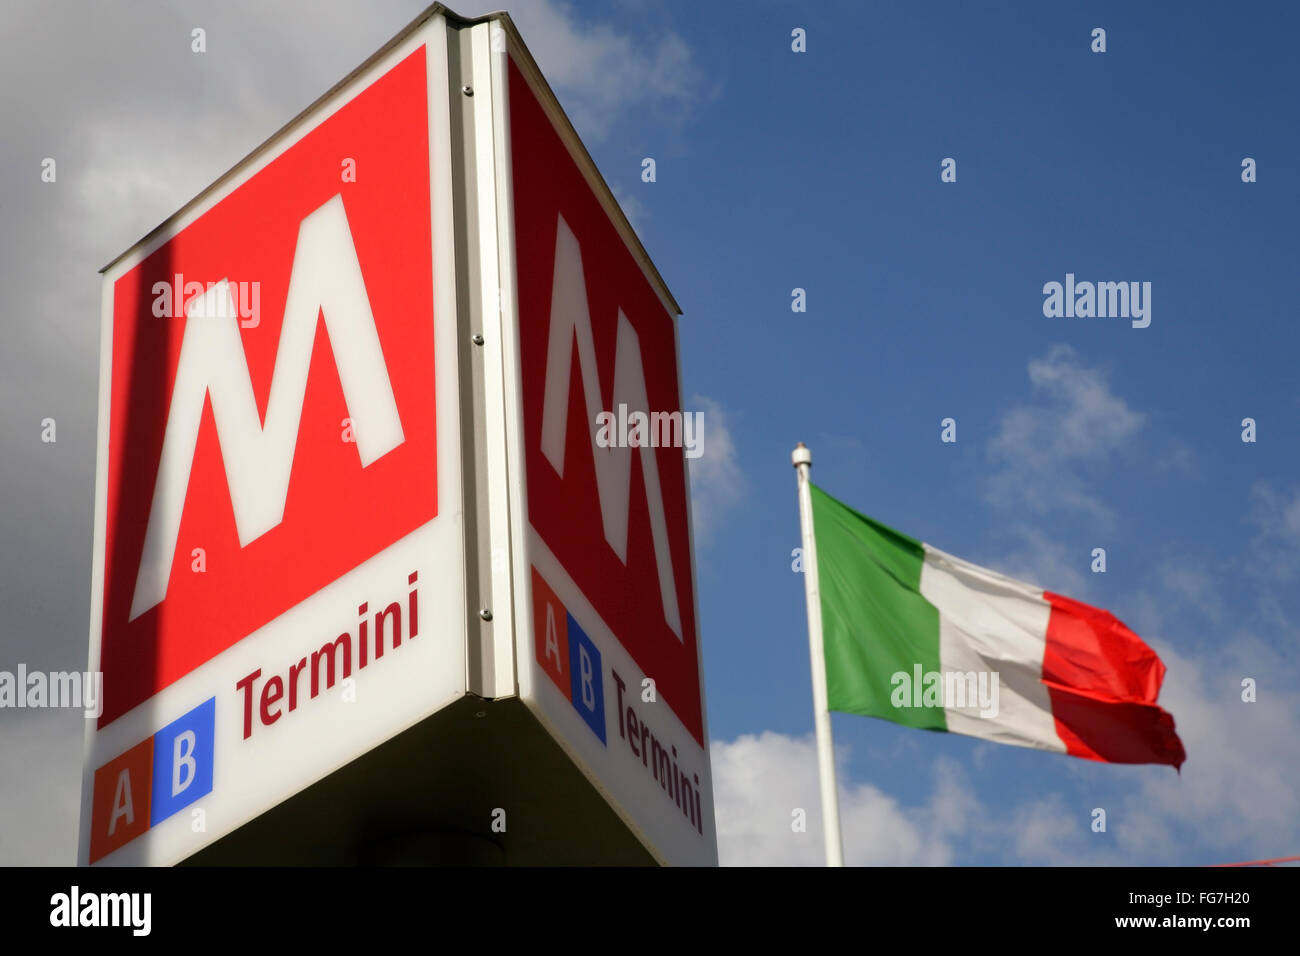 Sign for the Rome Metro system at the central Termini station, Italy Stock Photo